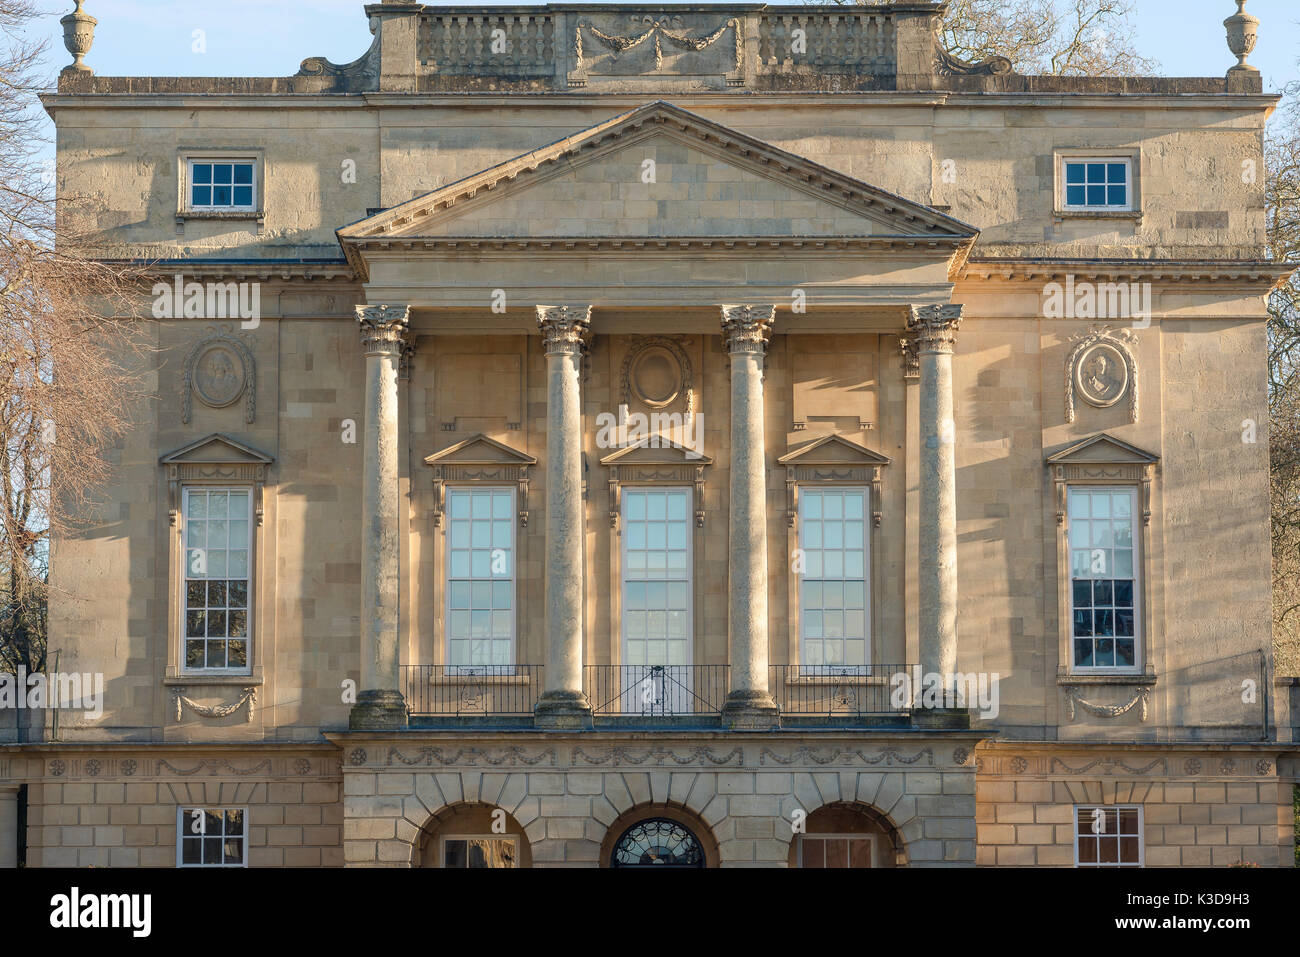 Bath city museum, frontal detail of the the Holburne Museum in Bath, a grand Georgian Palladian style building that houses an extensive art collection. Stock Photo